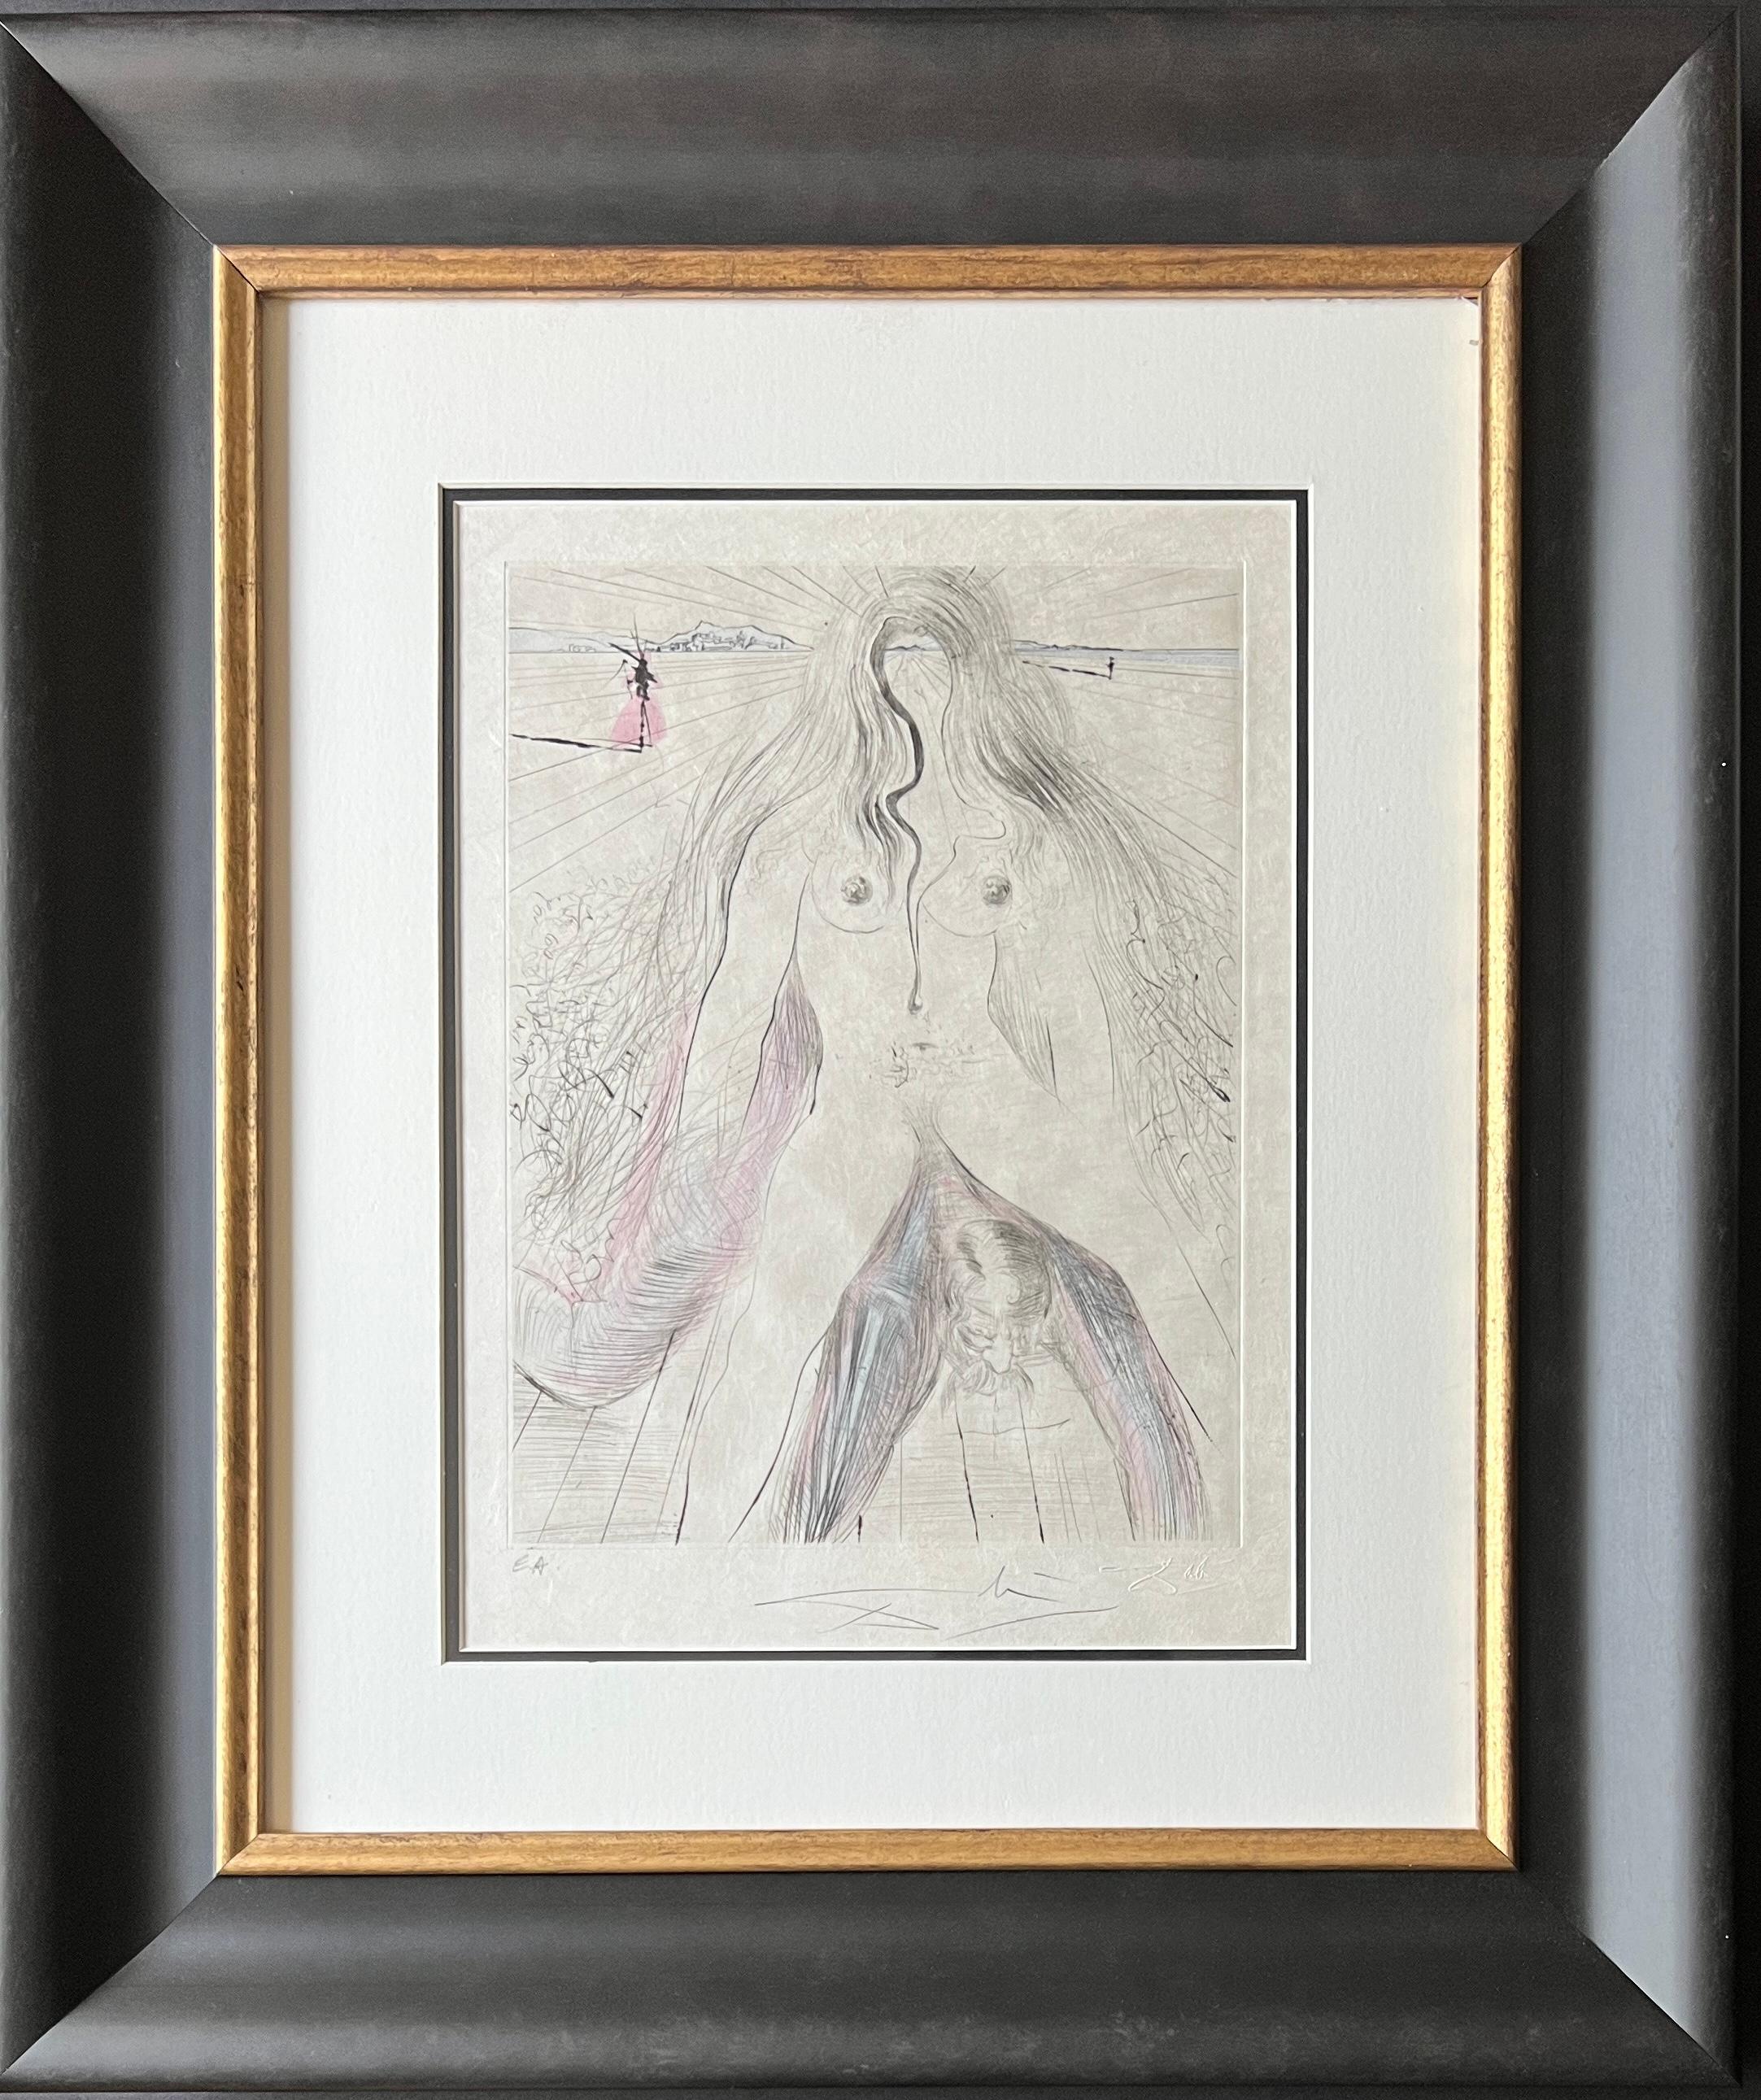 hand watercolored drypoint etching on extremely fine Japanese paper, edited in 1969
limited edition of 145 copies water-colored
, numbered in lower left corner ea ( artist proof )
signed in pencil by artist in lower right corner
paper size: 38.5 x